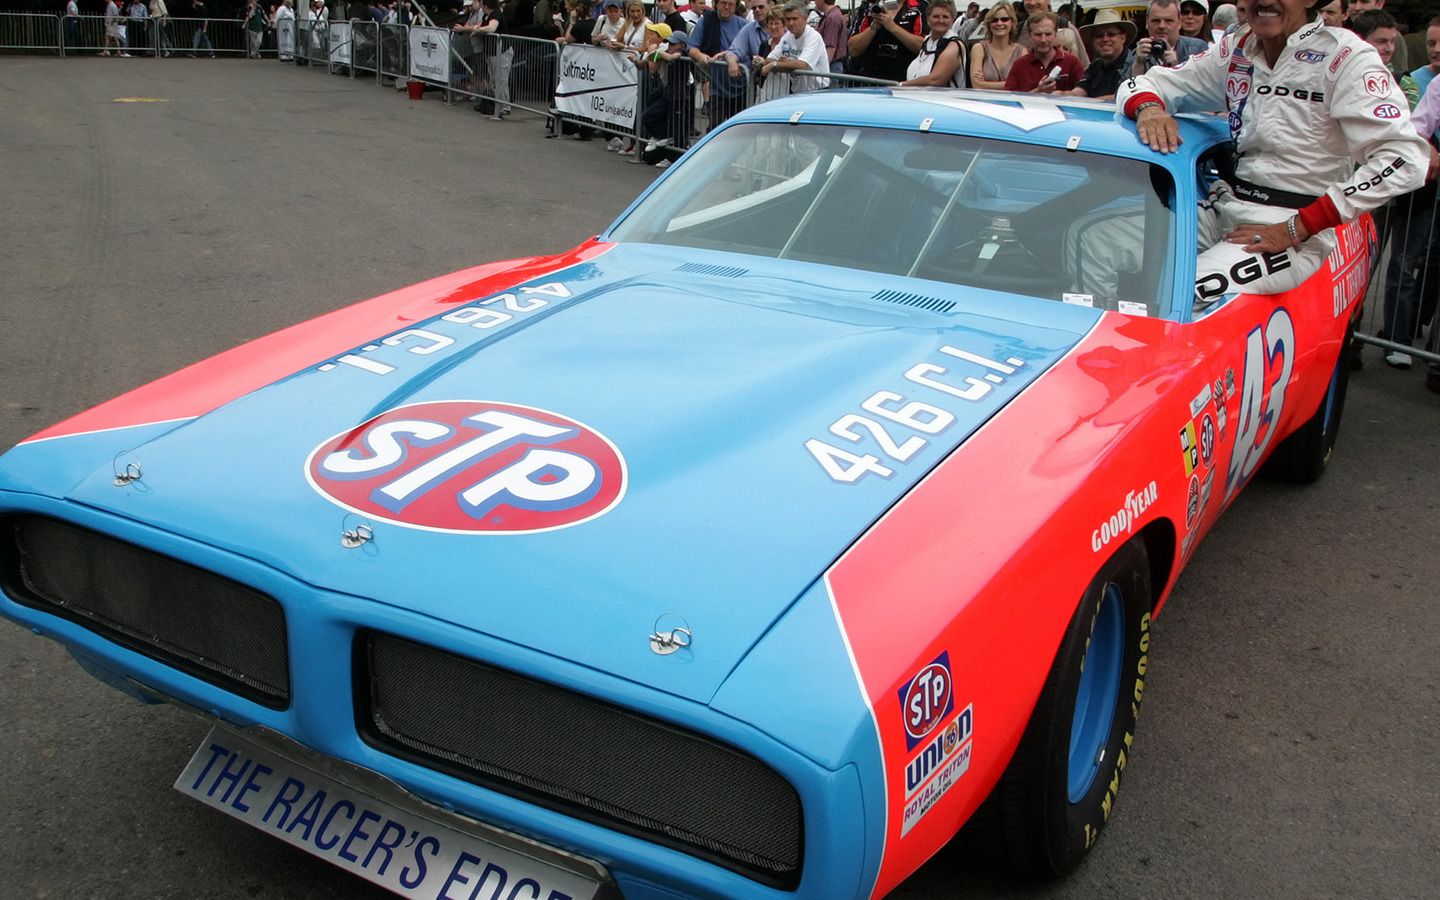 1972 Dodge Charger Nascar Race Car American Racing Legend Richard Petty In His Car 1600×1200